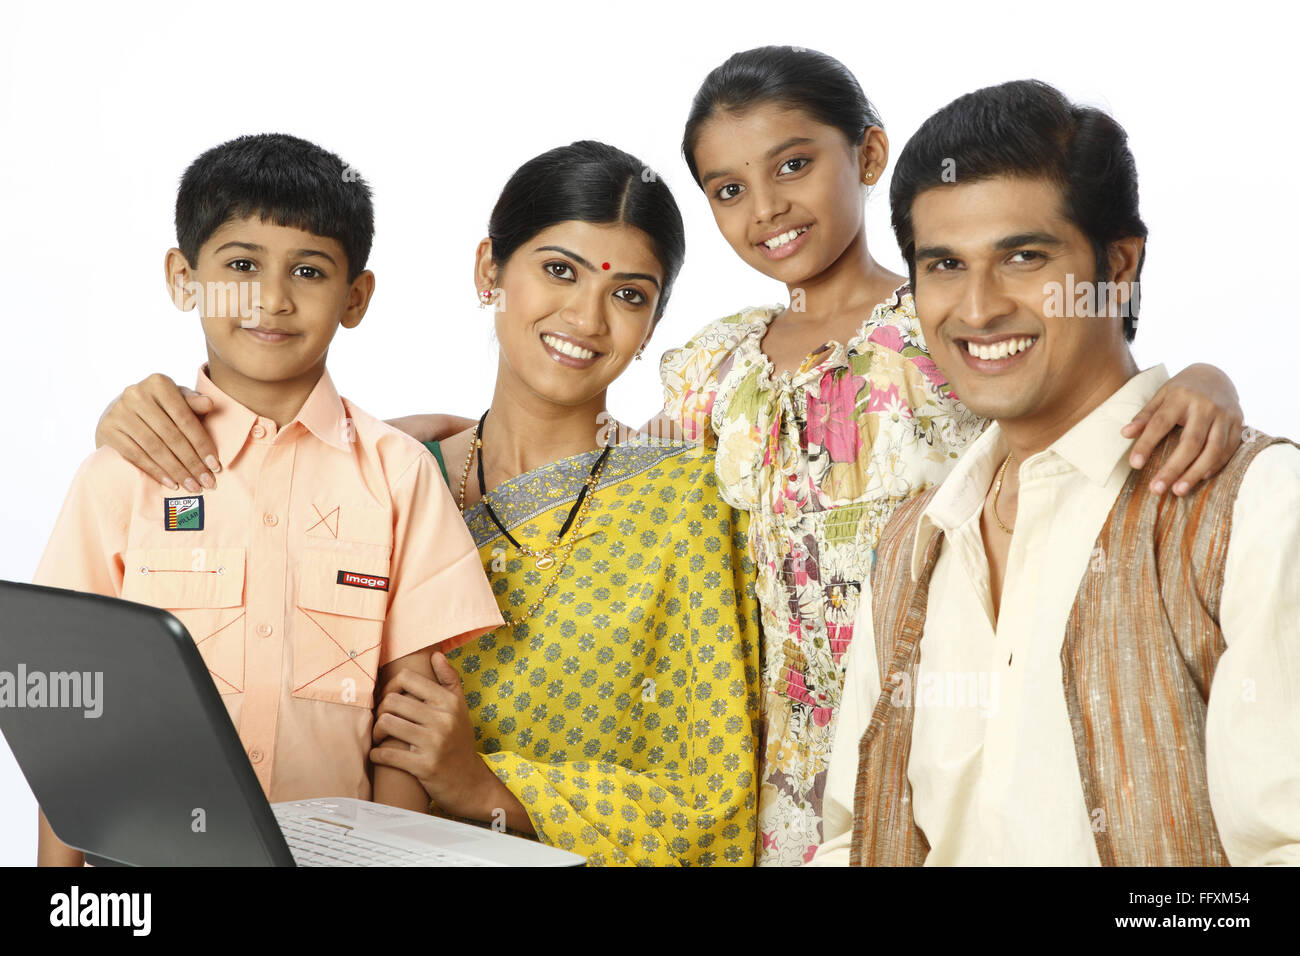 Rich rural family with laptop on table MR#743A,743B,743C,743D Stock Photo